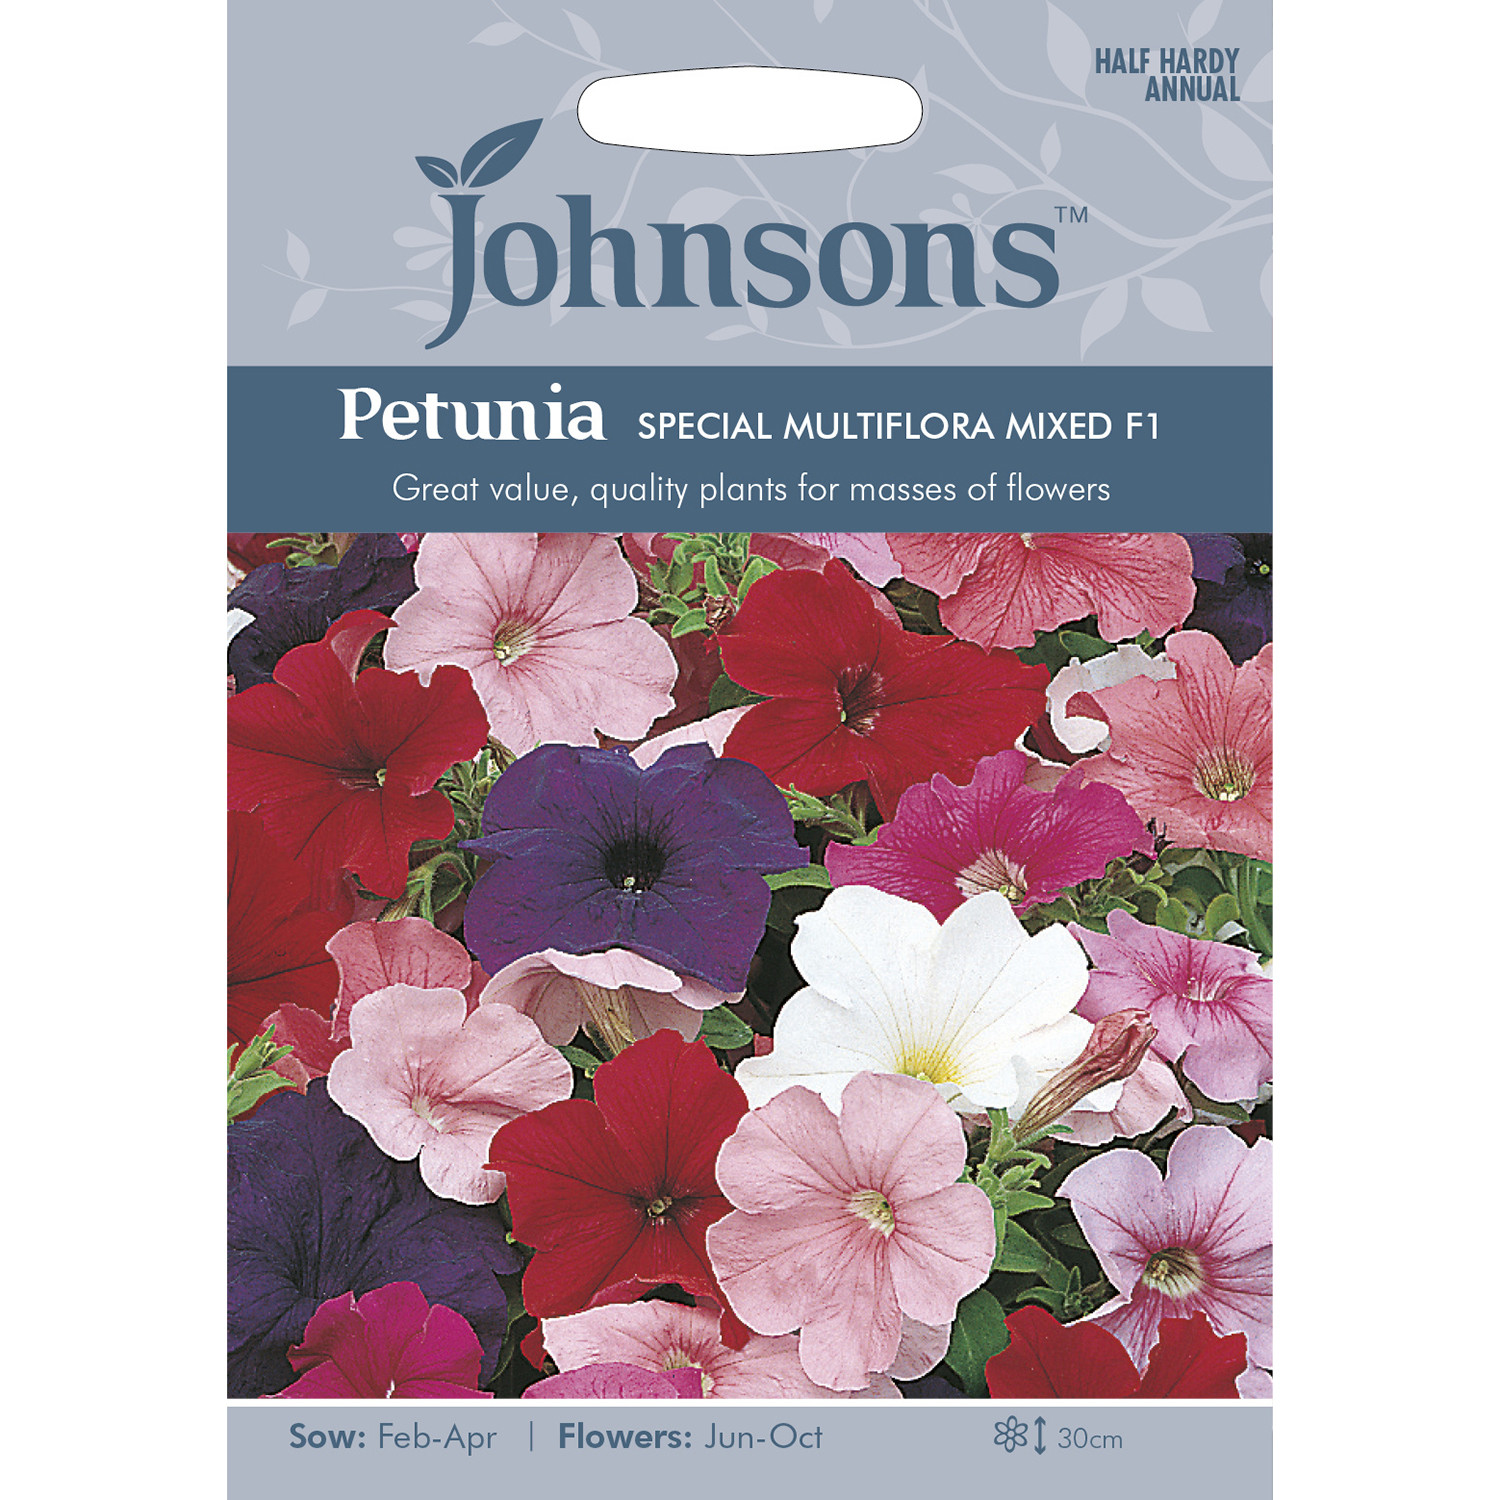 Johnsons Petunia Special Multiflora Mixed F1 Flower Seeds Image 2